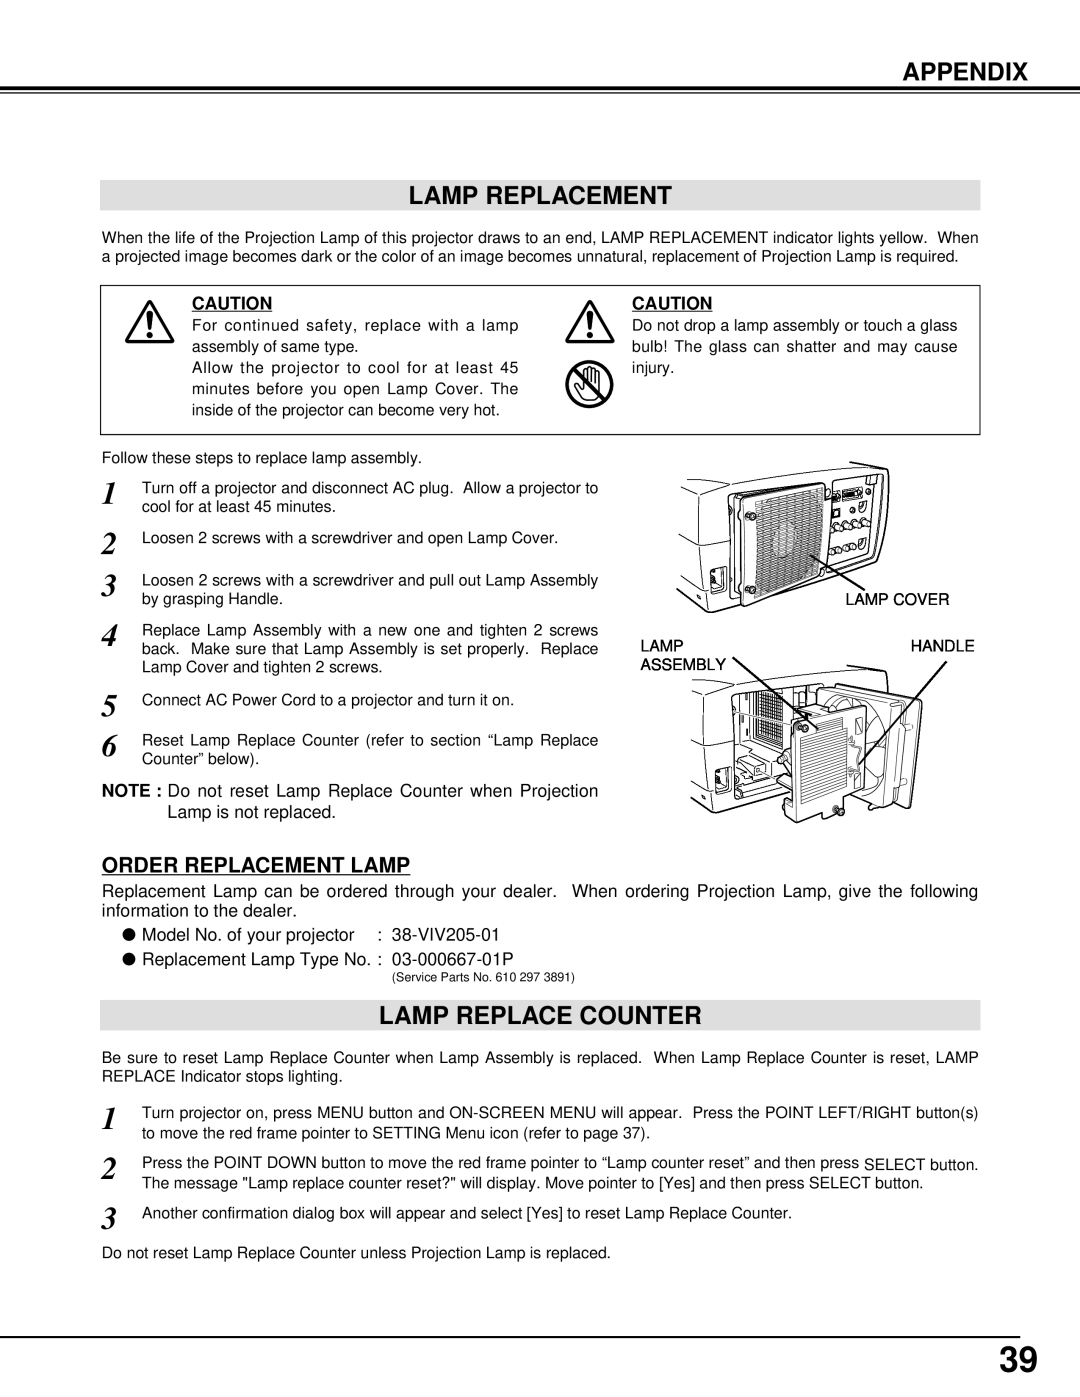 Christie Digital Systems 38-VIV205-01 user manual Appendix Lamp Replacement, Lamp Replace Counter, Order Replacement Lamp 